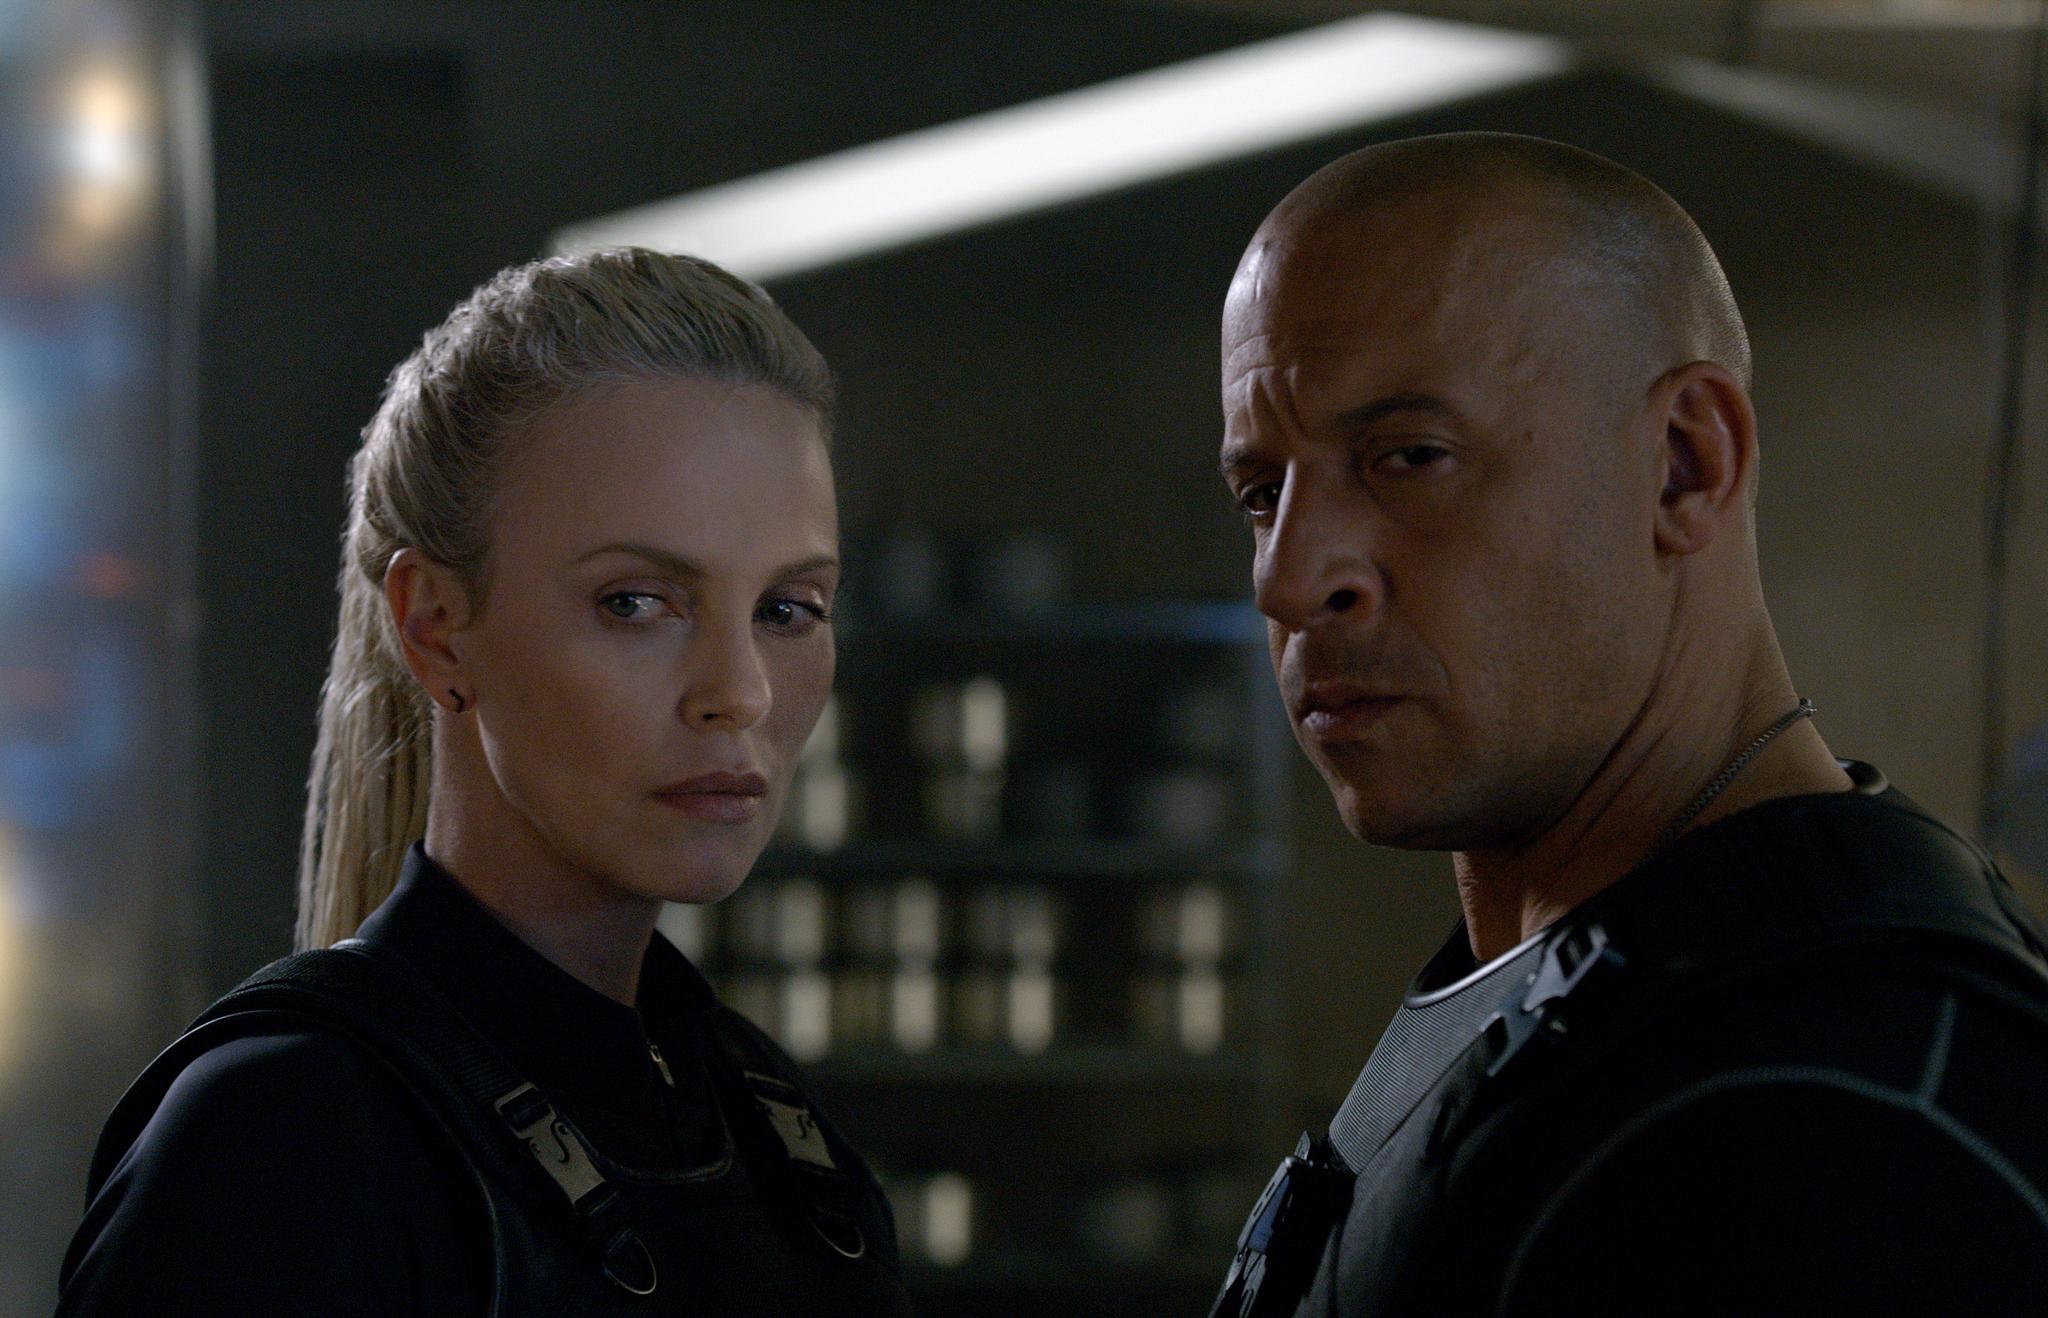 Charlize Theron and Vin Diesel in Fast and Furious 8.